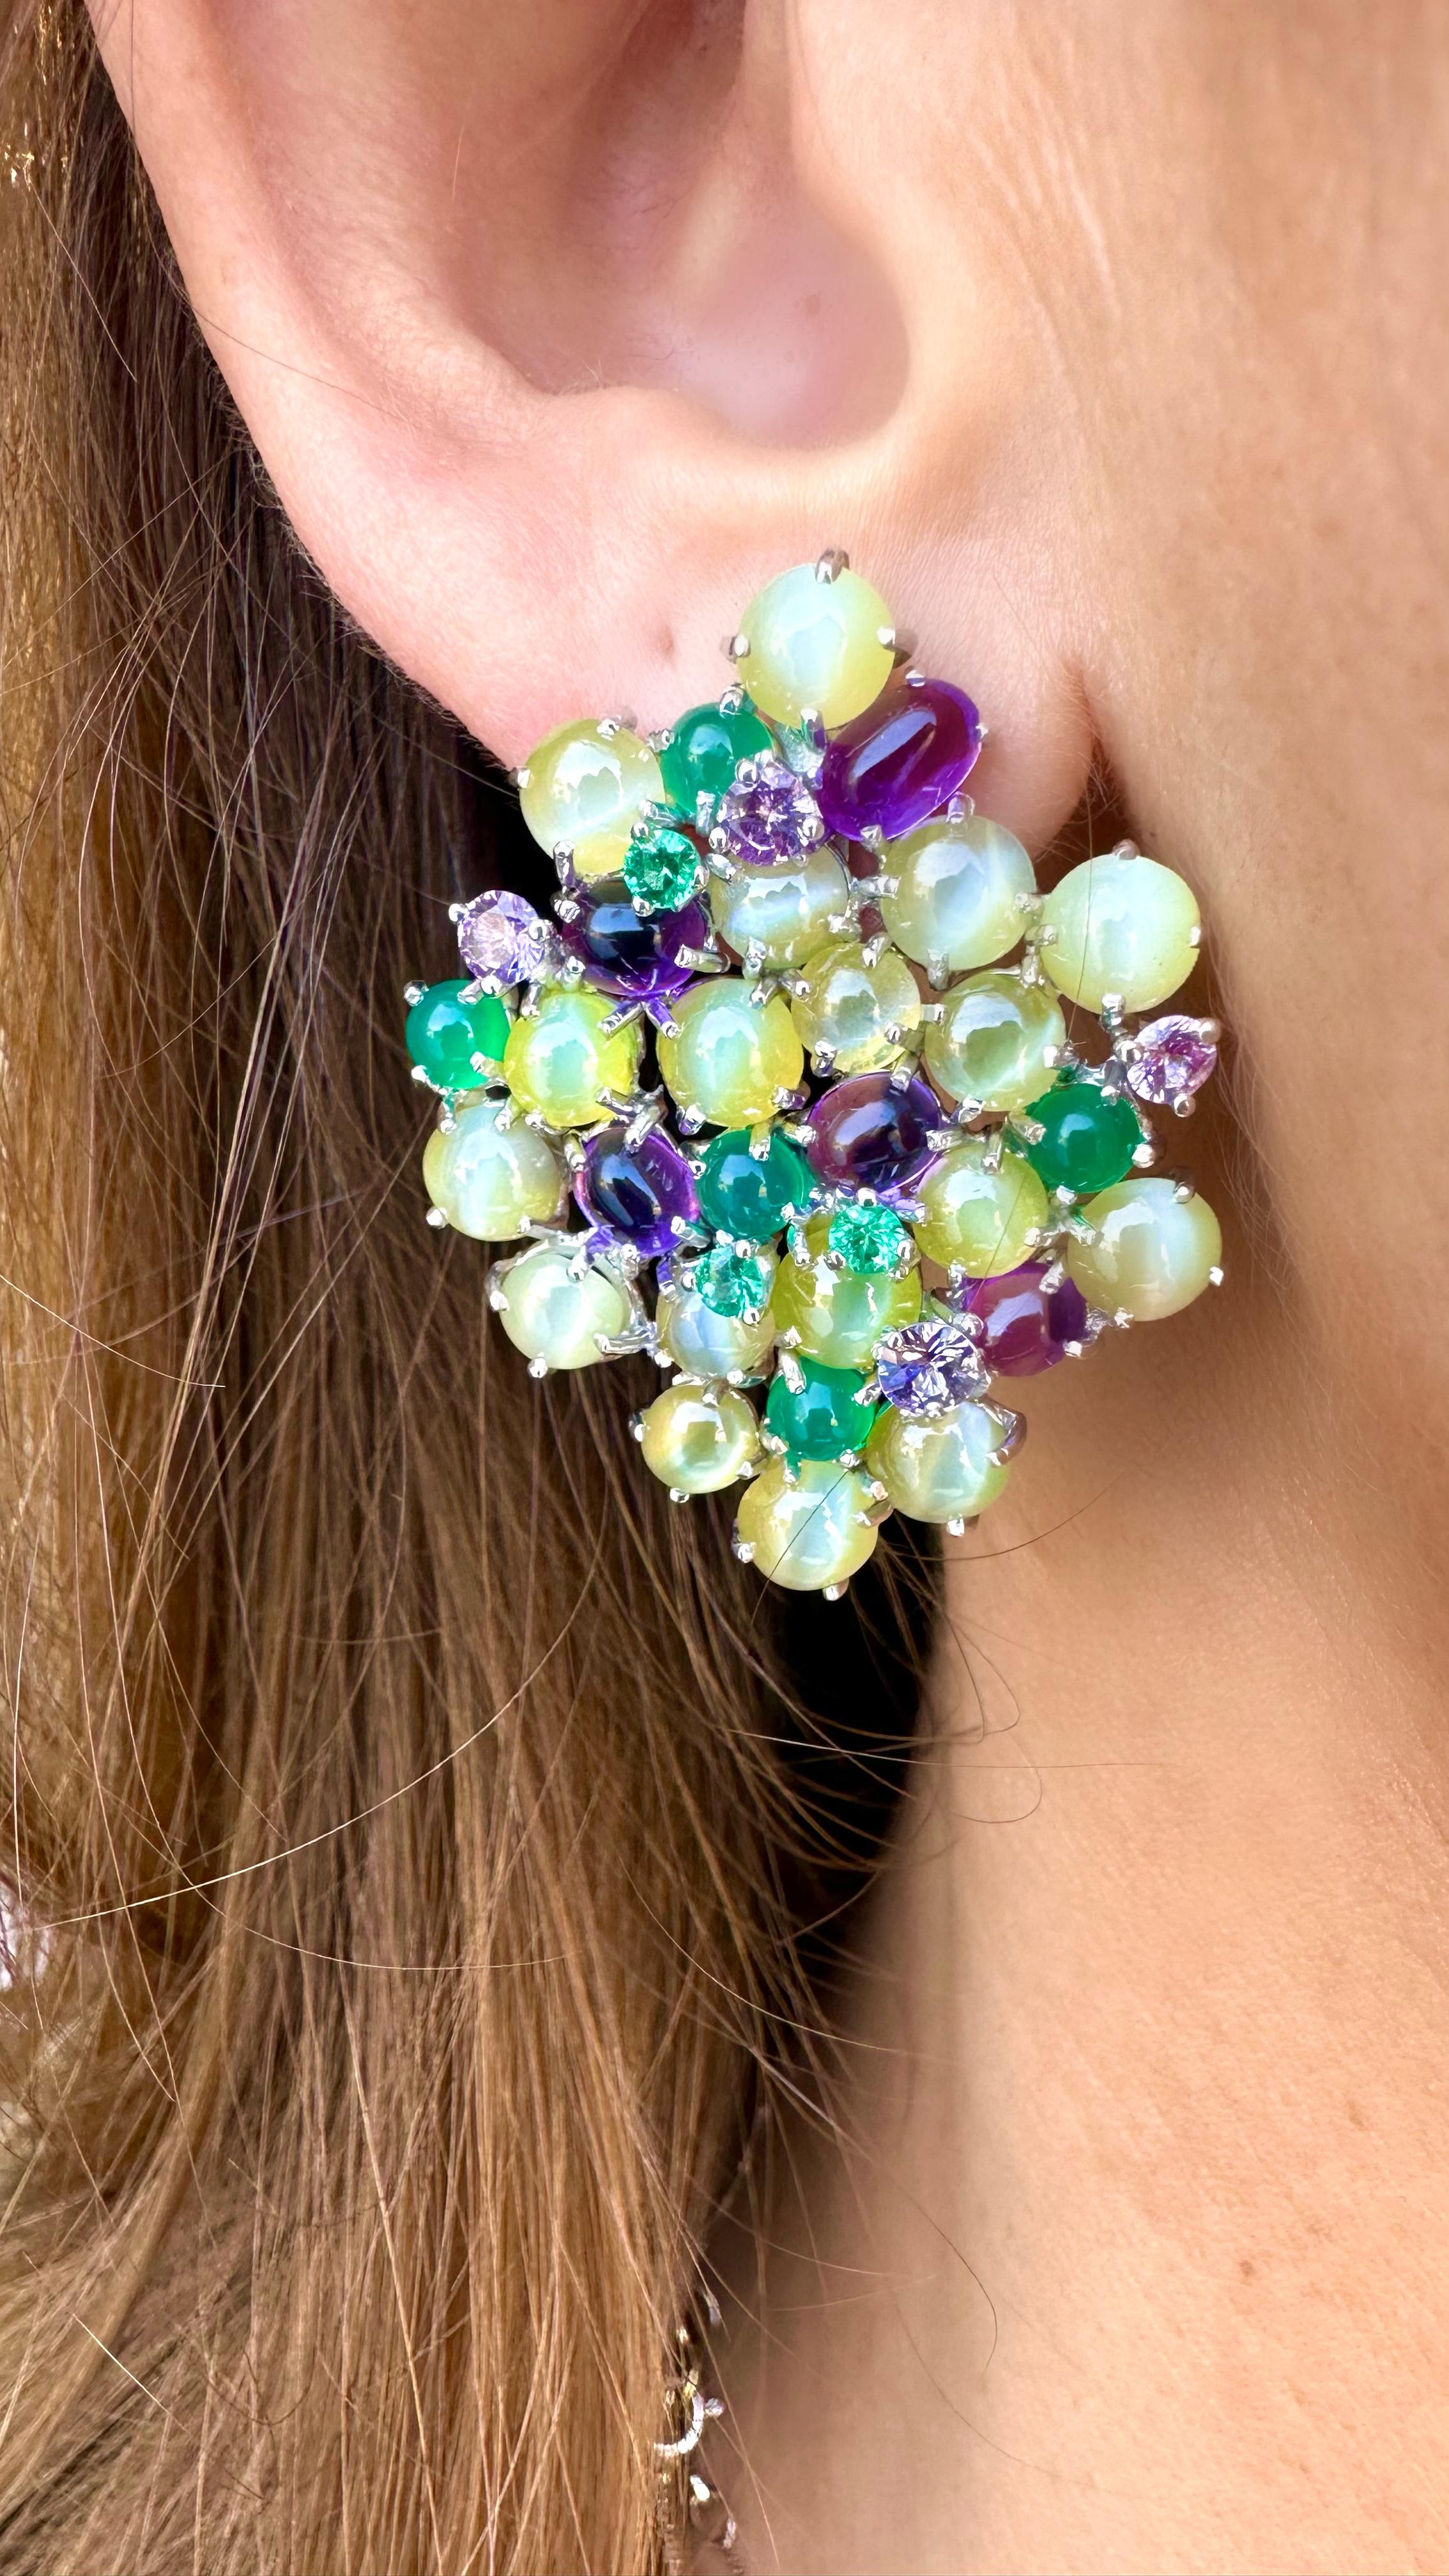 Rosior One-off Drop Earrings made in 19.2K White Gold and set with:
- 35 Crysoberyls weighing 24,91 ct, 
- 12 Agates weighing 3,26 ct, 
- 10 Amethysts weighing 4,09 ct,
- 8 Purple Sapphires weighing 1,24 ct 
- 7 Emeralds weighing 0,52 ct.
Weight in